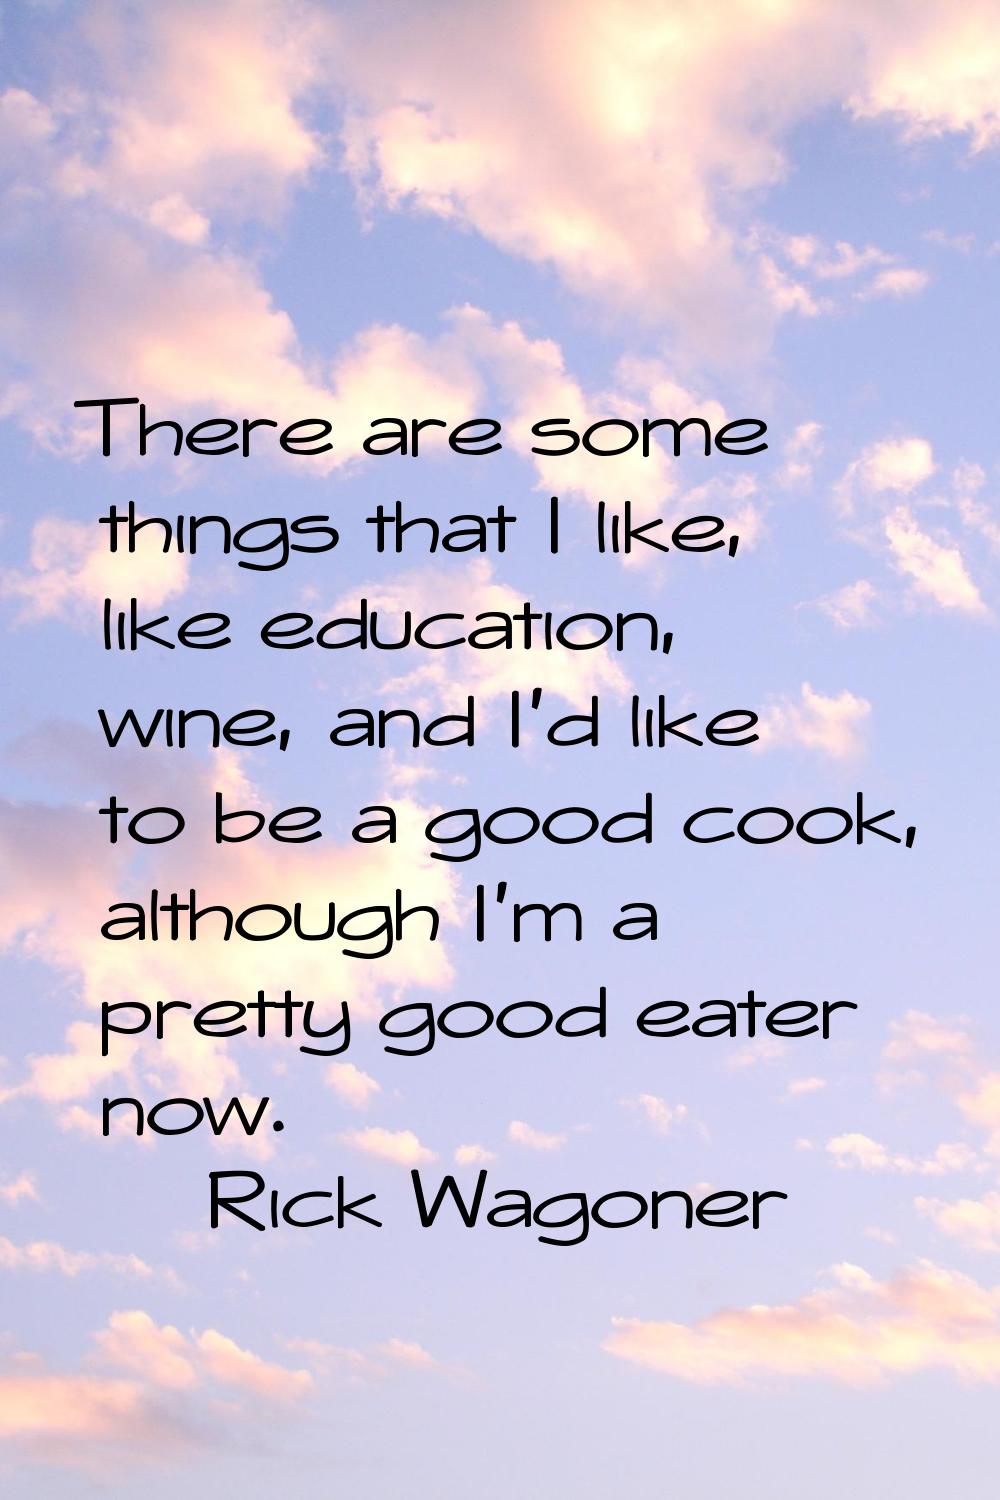 There are some things that I like, like education, wine, and I'd like to be a good cook, although I